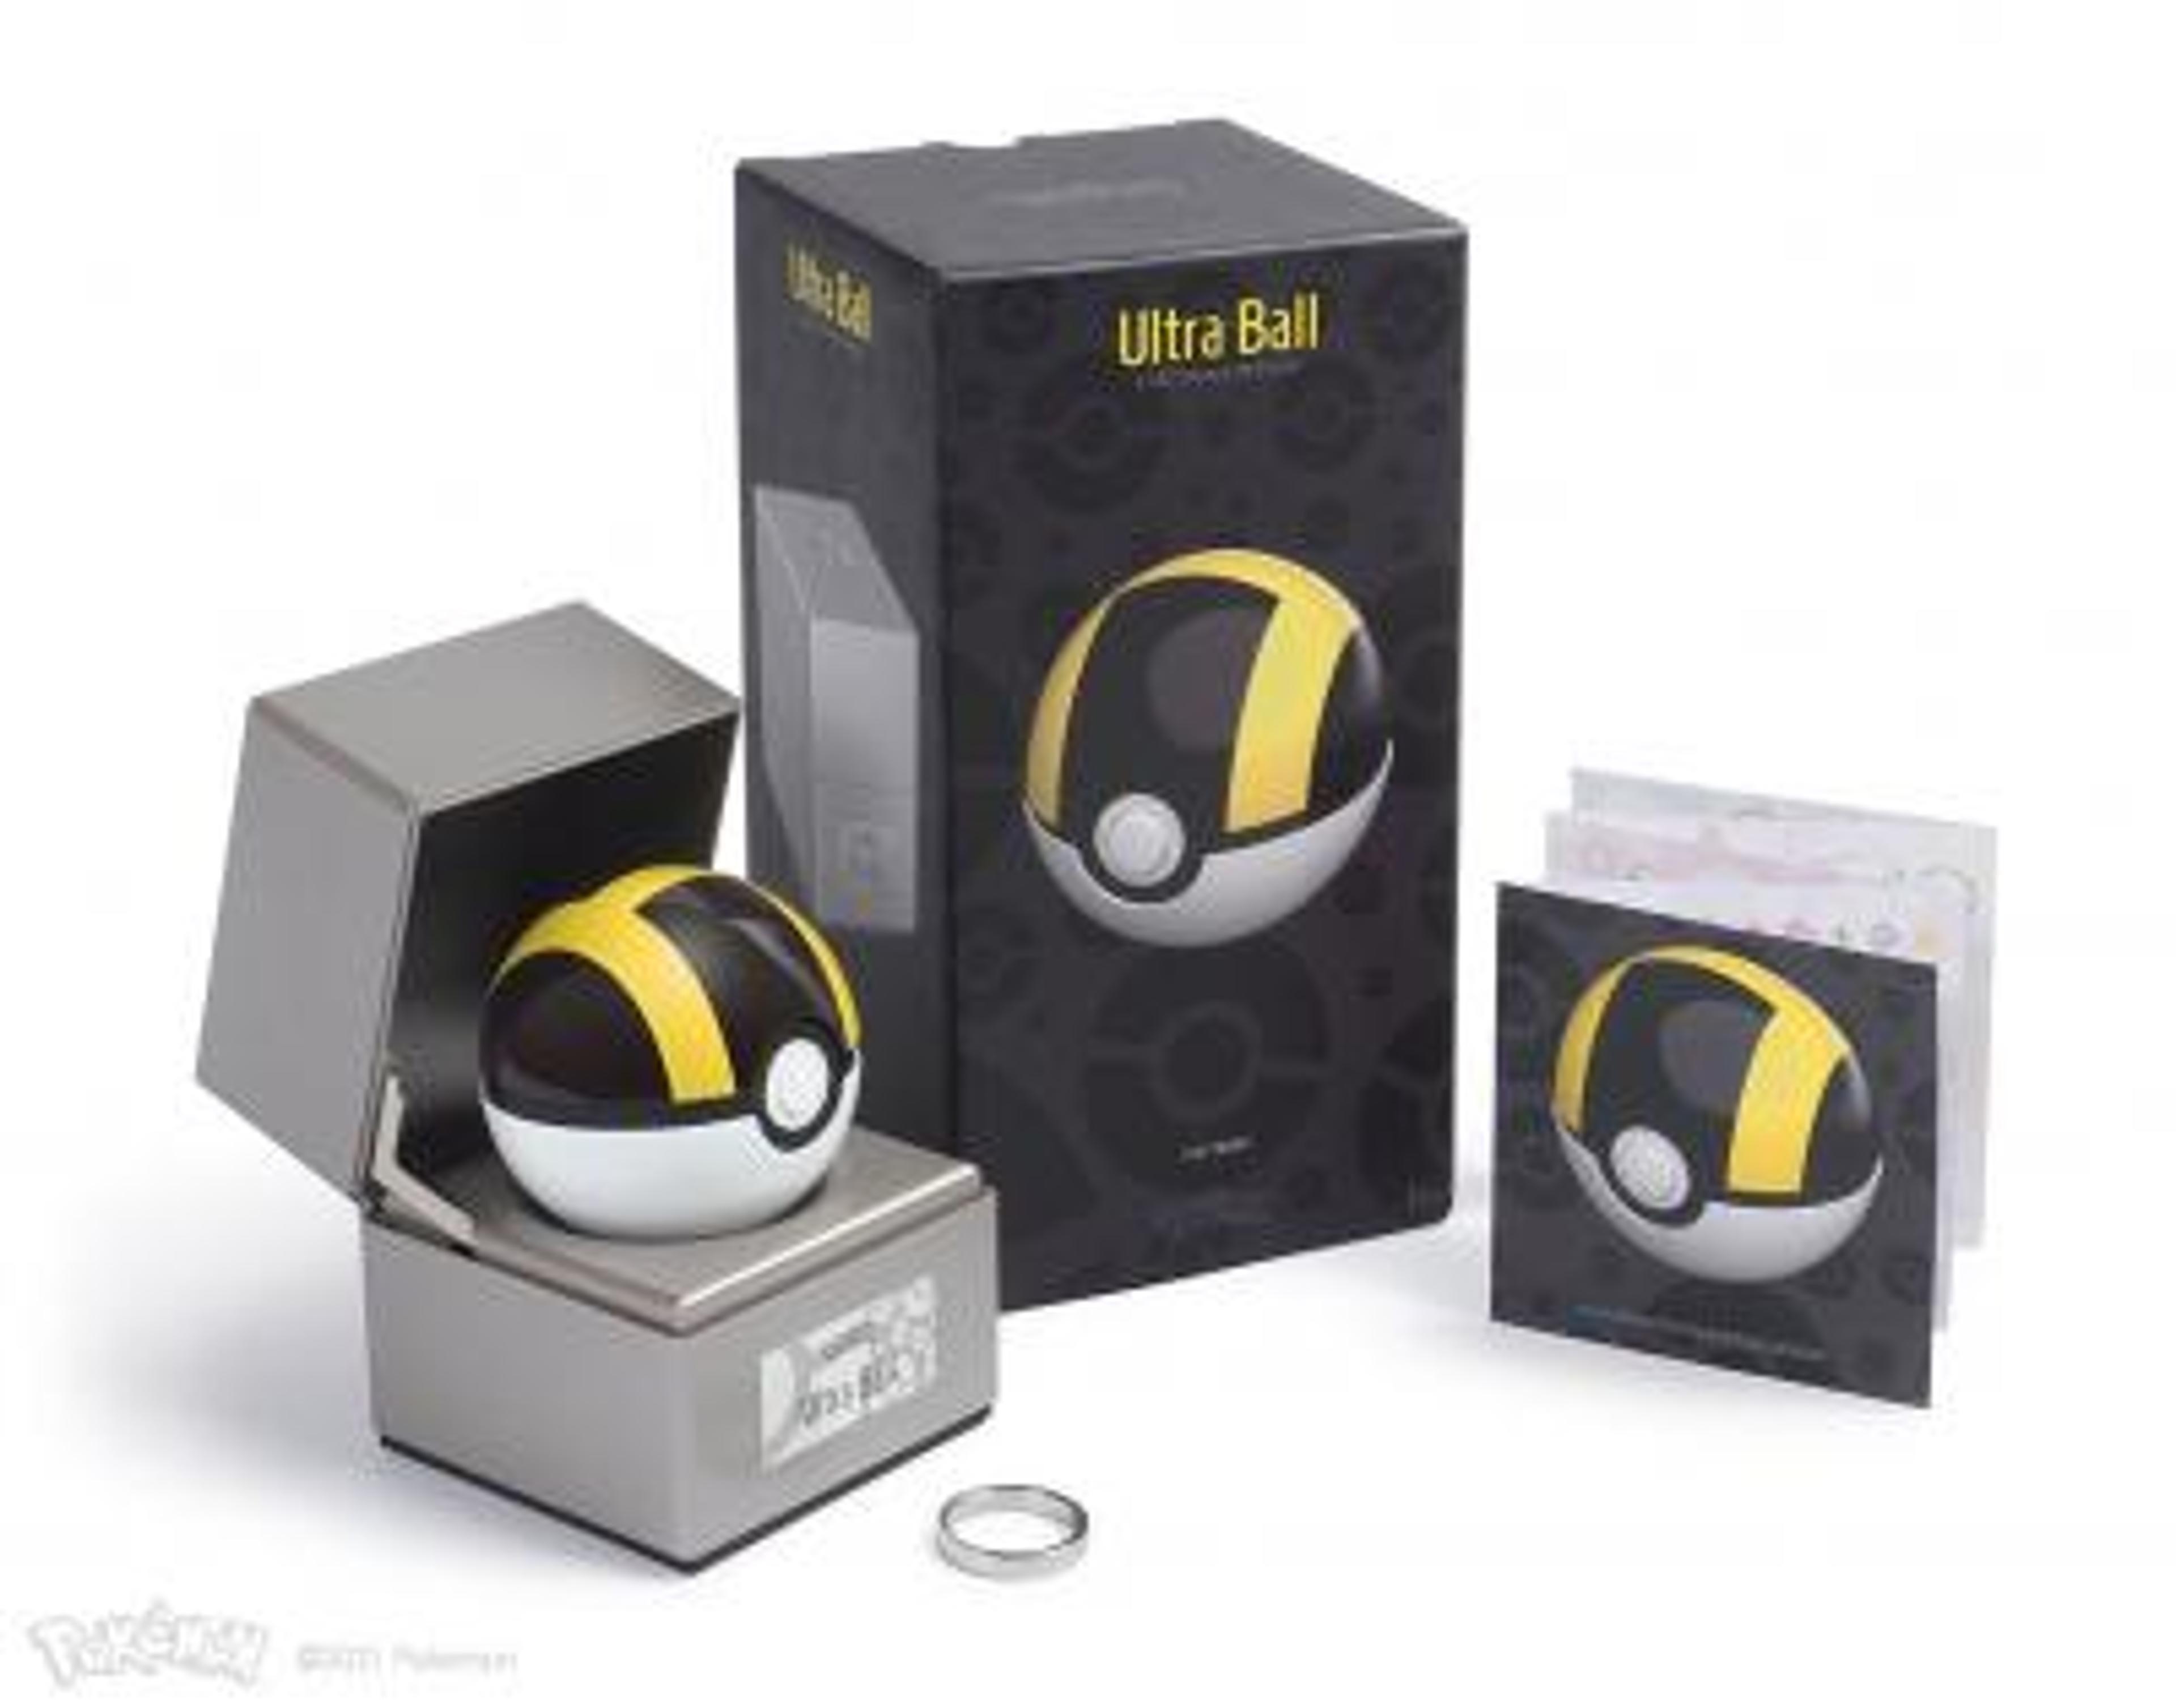 Alternate View 1 of ULTRA BALL Replica by The Wand Company